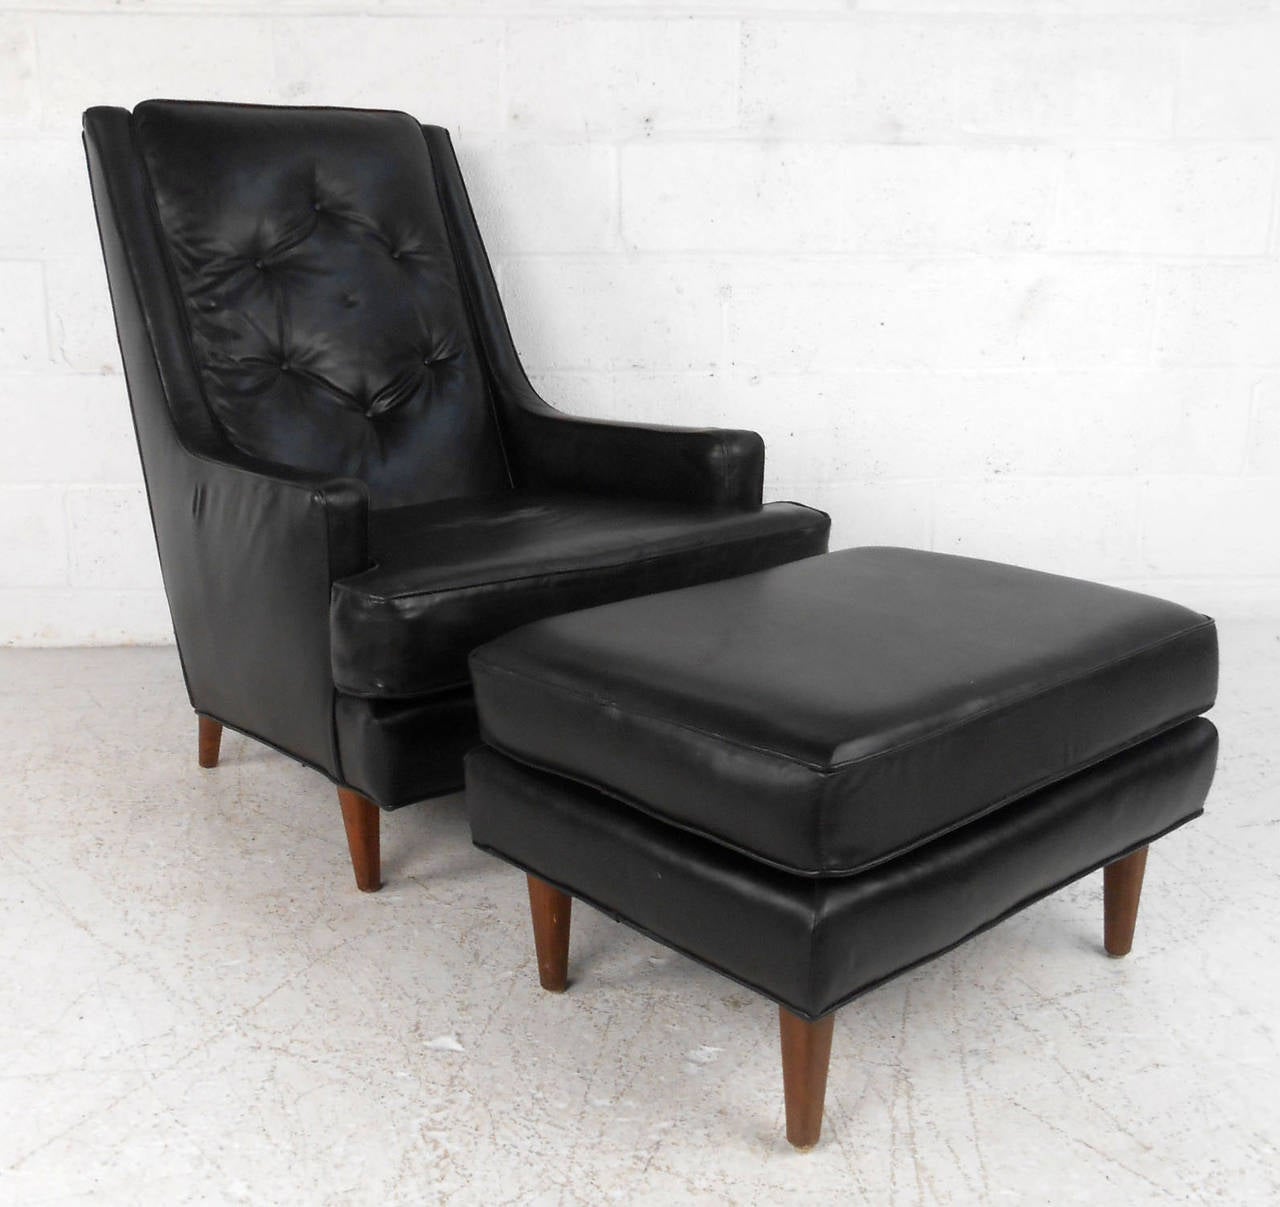 This matched lounge chair features unique tufted vinyl upholstery and tapered American walnut legs. Matching ottoman makes this an extremely comfortable retro addition to any seating arrangement. Please confirm item location (NY or NJ). Dimensions: